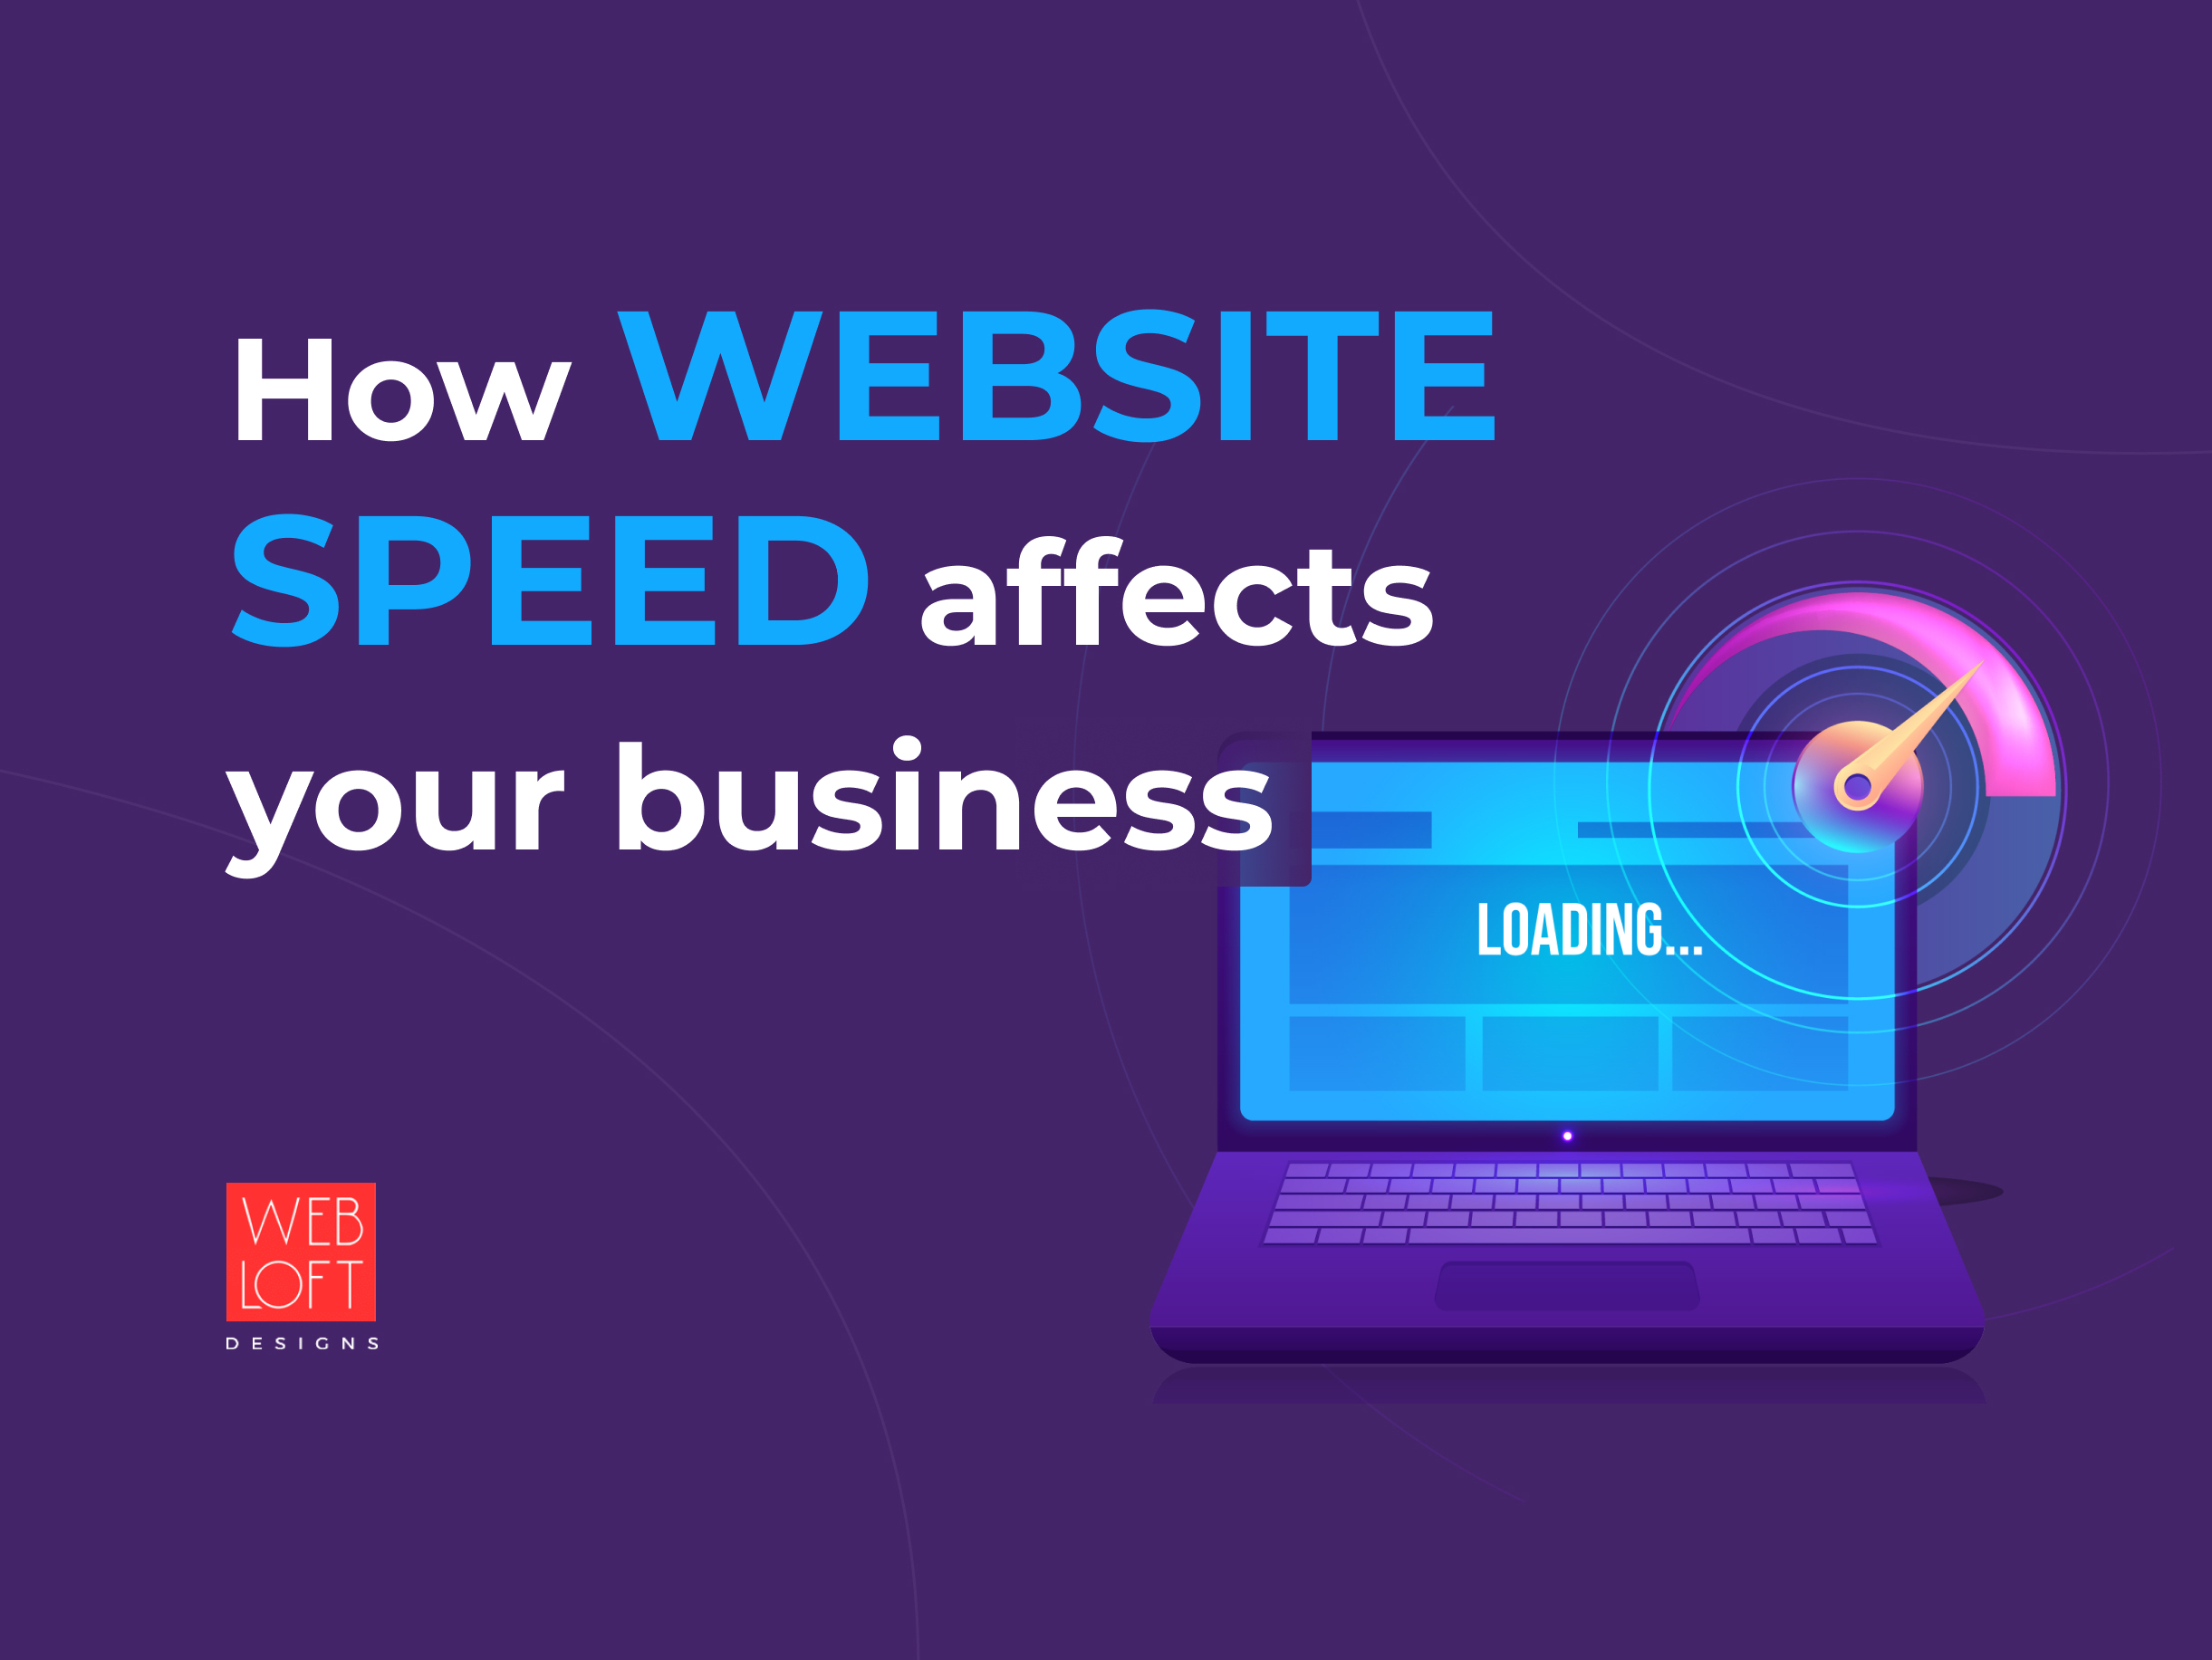 What is the financial impact of a slow website on your business? - Web Loft Designs